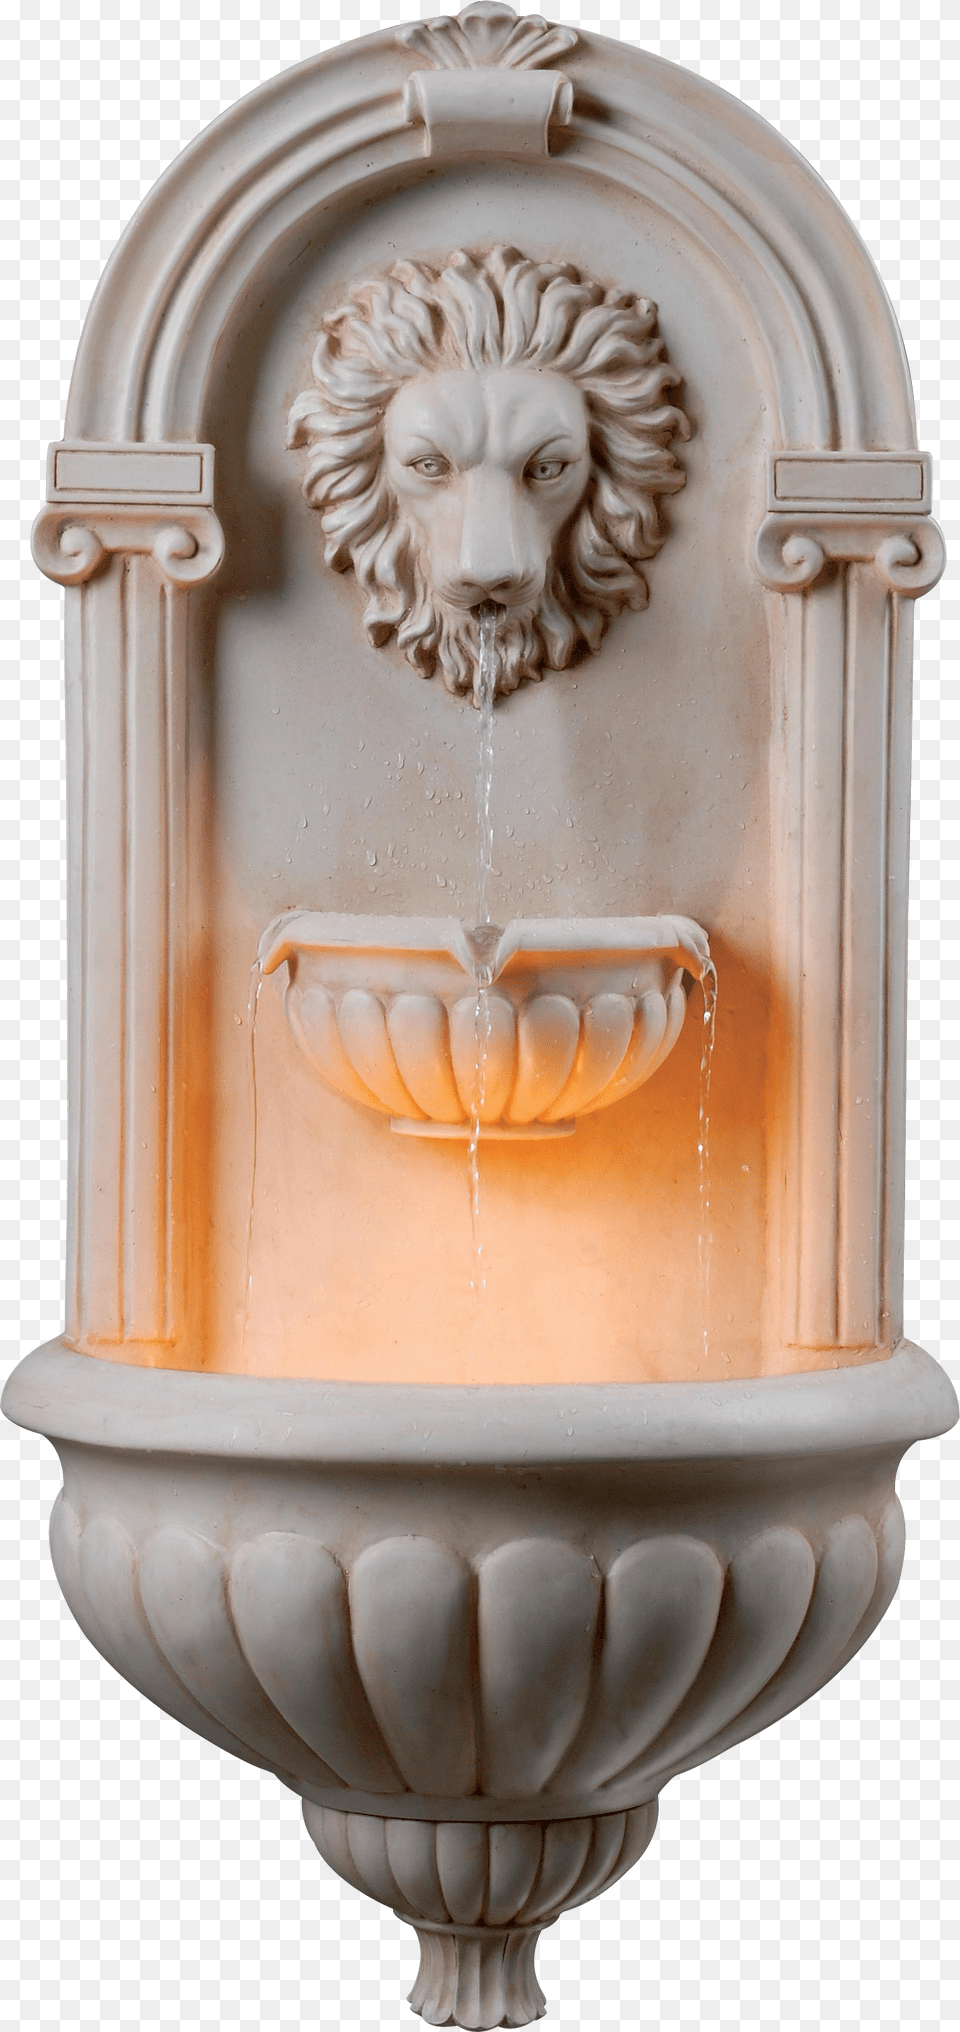 Lion Fountain Image Kenroy Home Regal Wall Fountain Sandstone, Architecture, Water, Drinking Fountain, Hot Tub Png